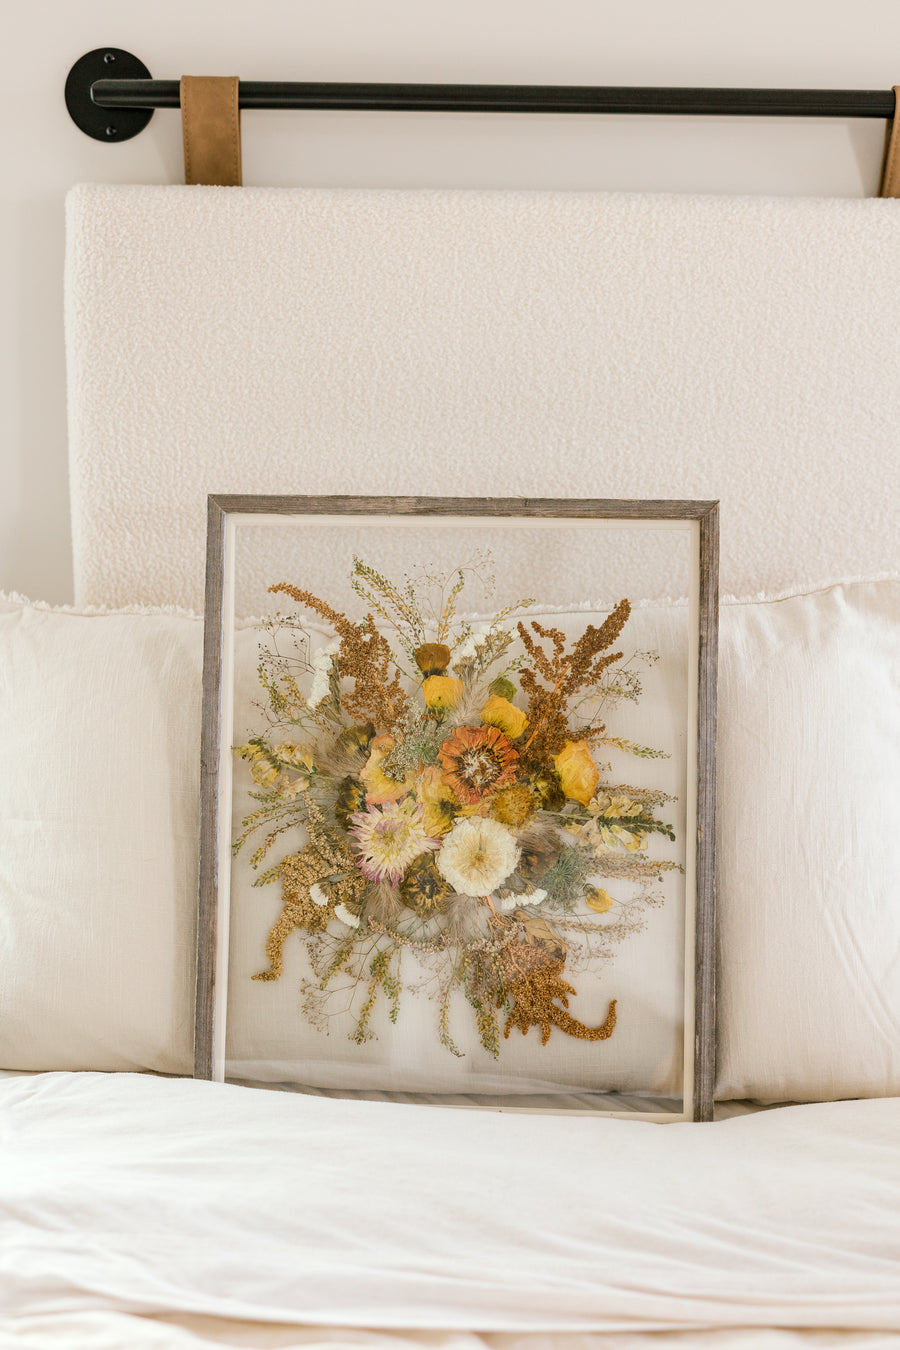 A fall pressed bouquet sitting against pillows on a bed.  